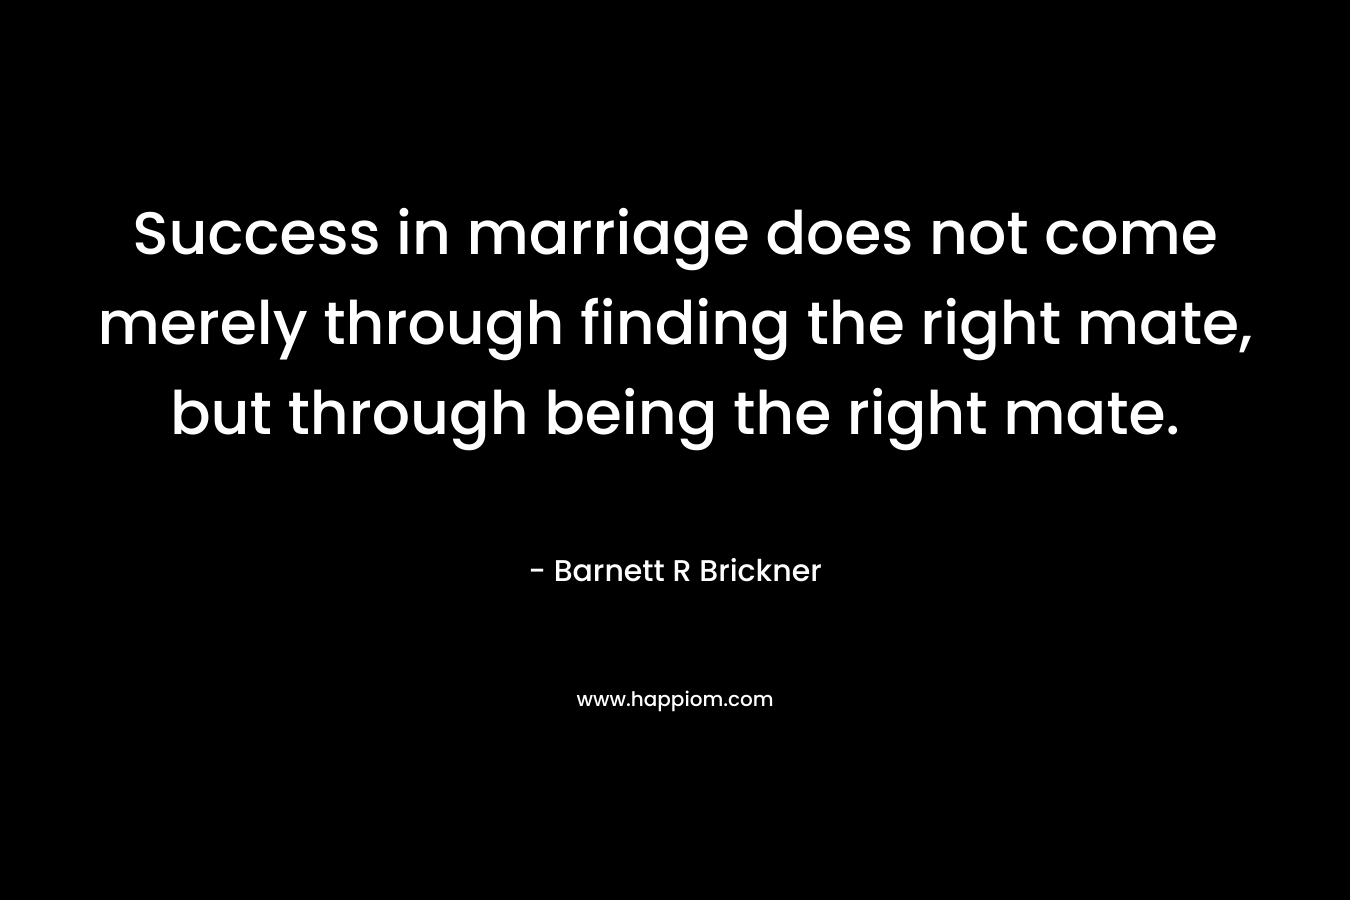 Success in marriage does not come merely through finding the right mate, but through being the right mate.